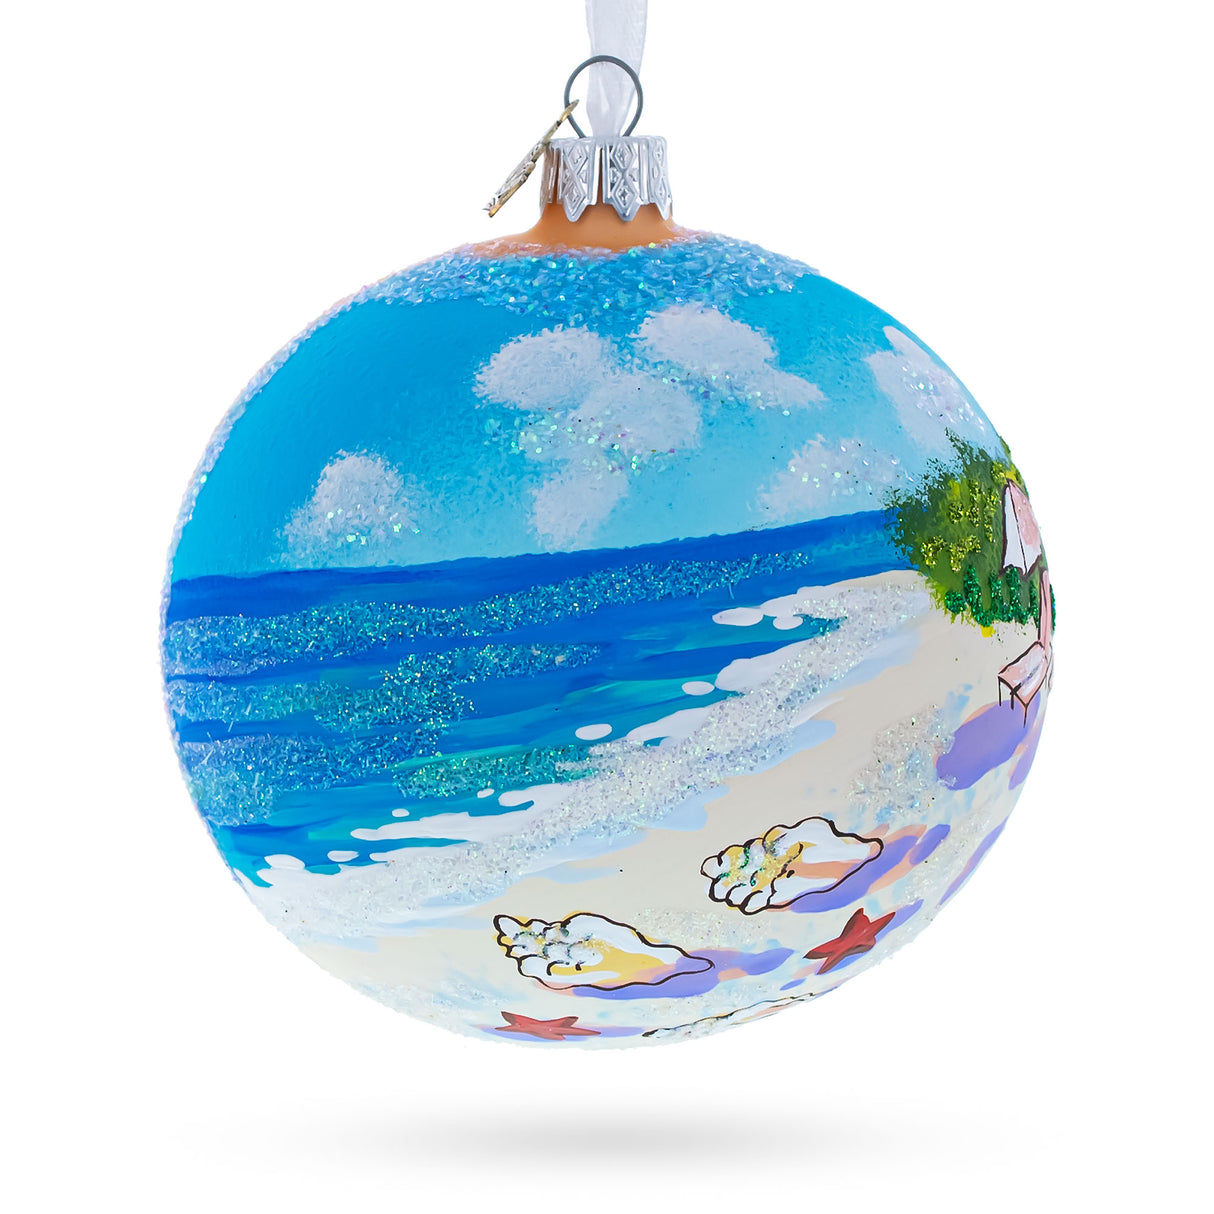 Glass Turks and Caicos Glass Ball Christmas Ornament 4 Inches in Multi color Round